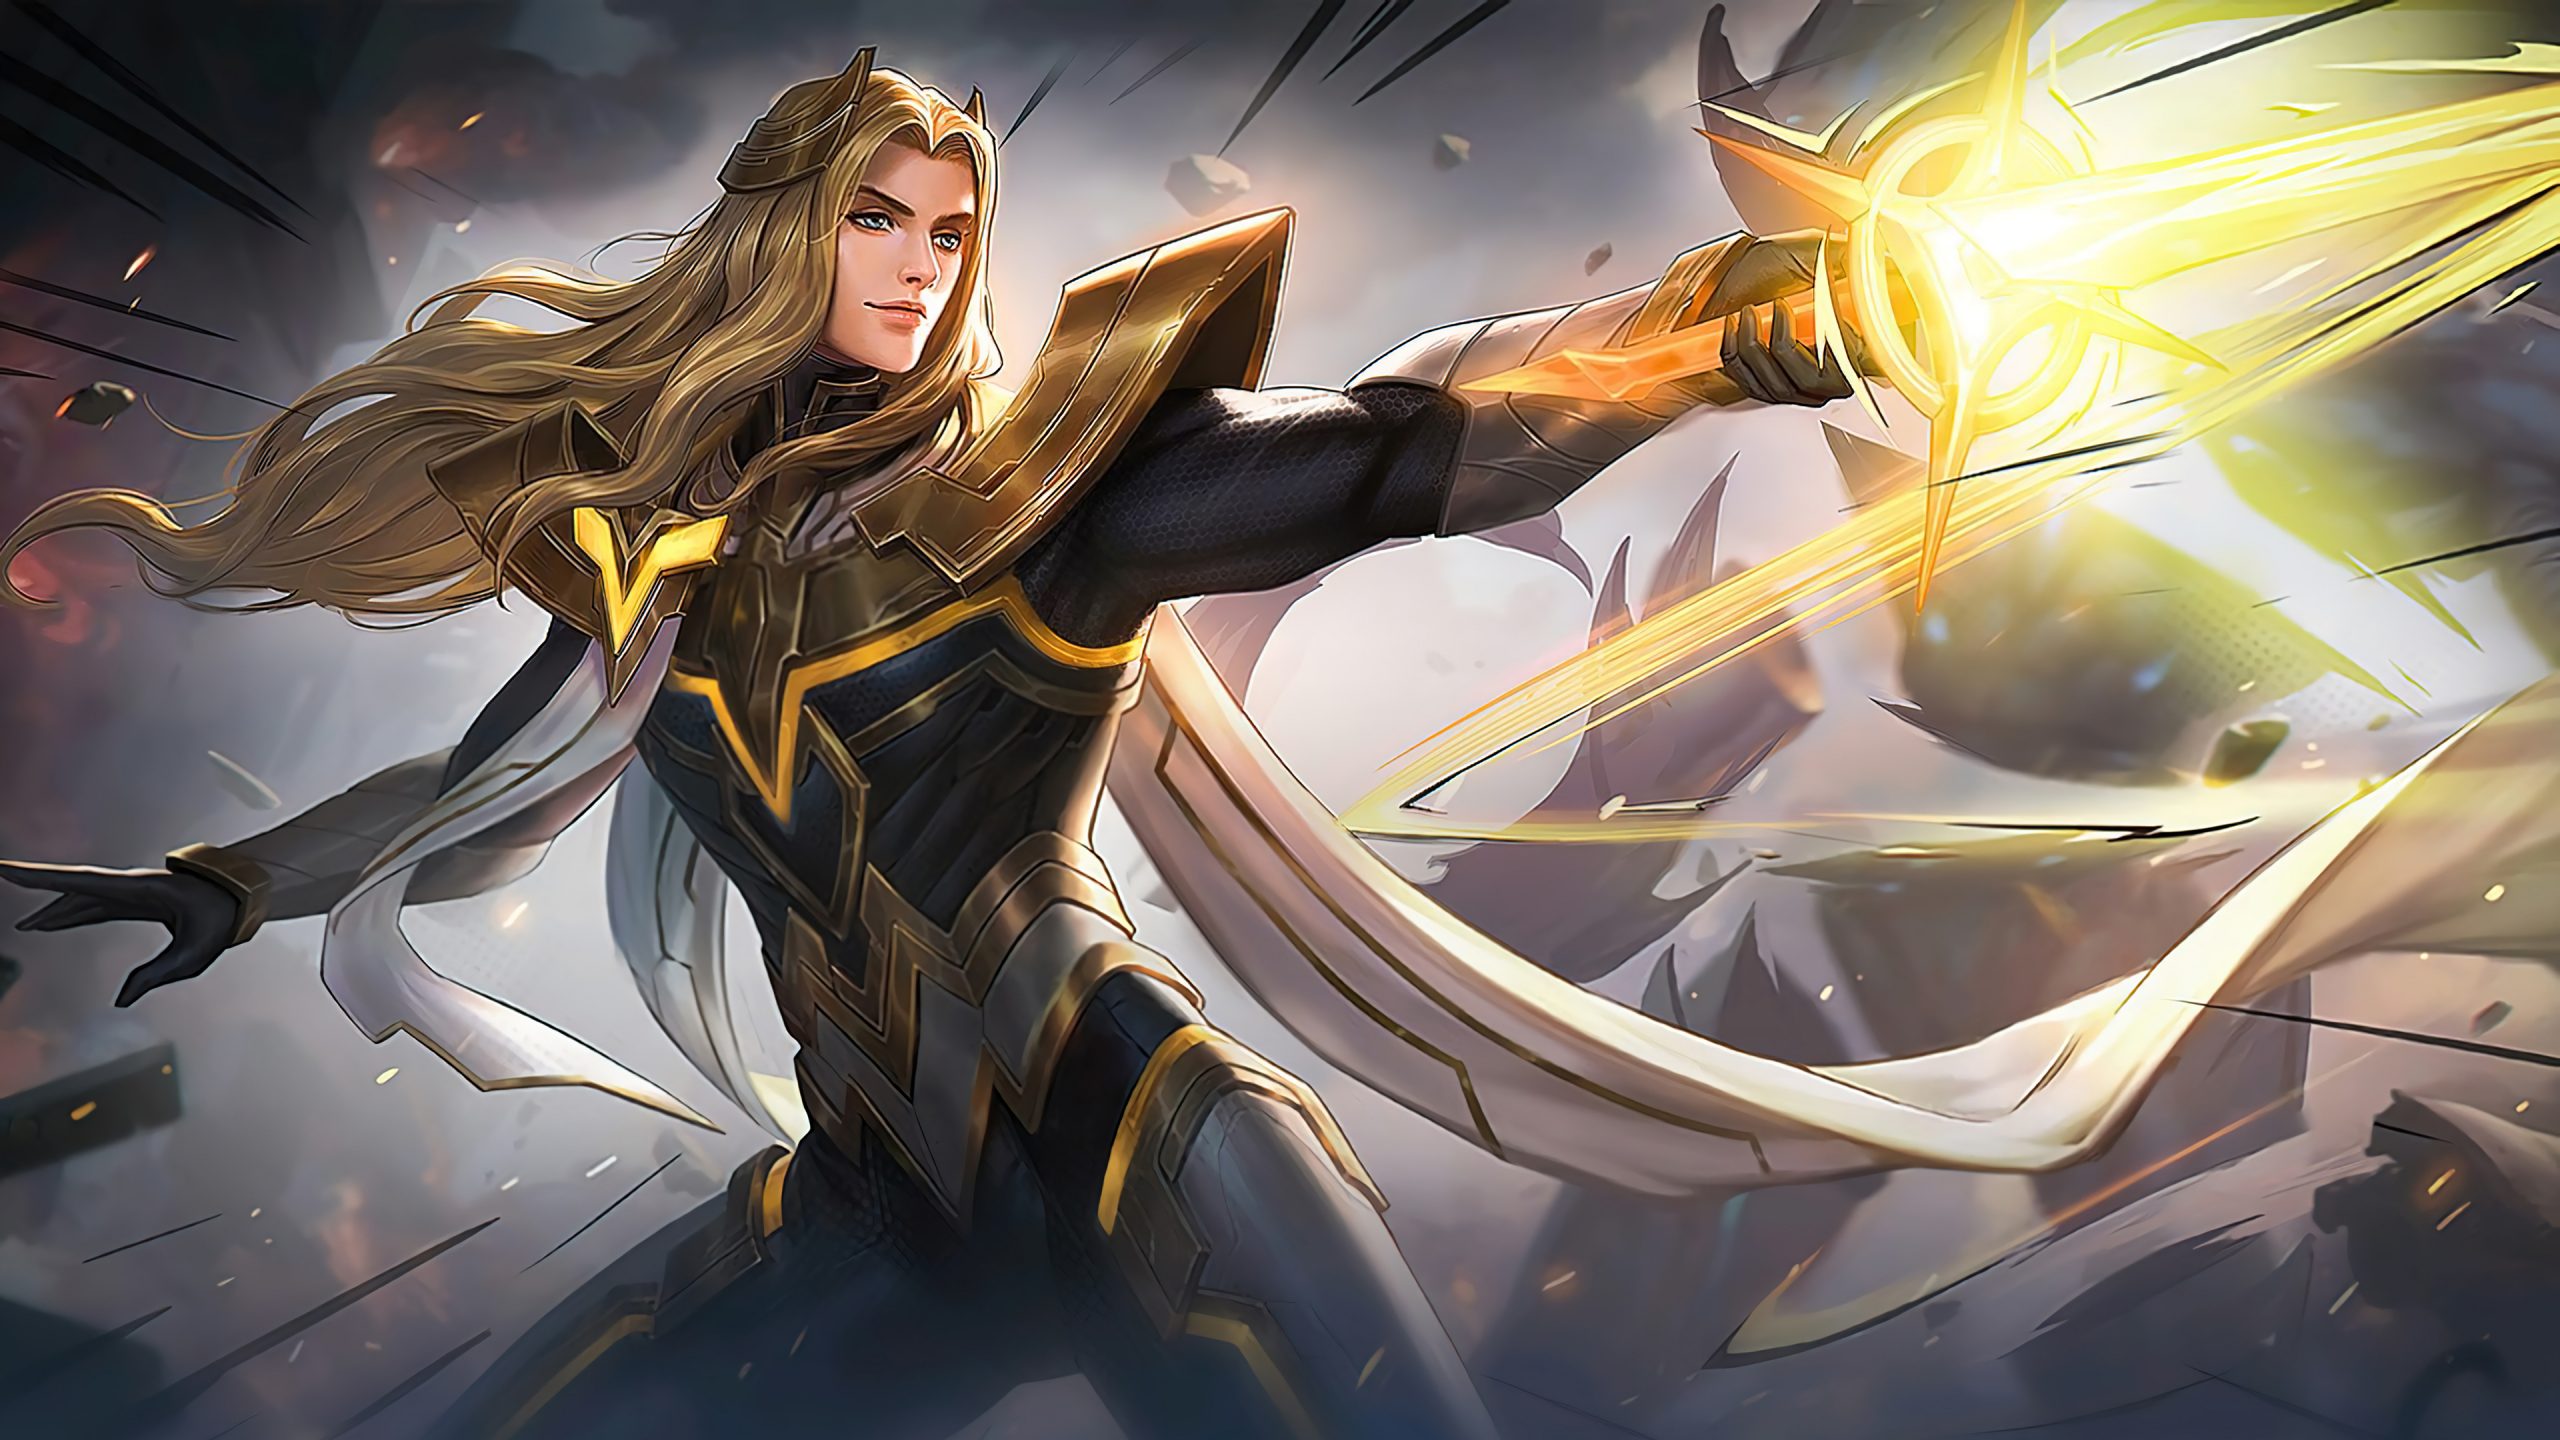 Wallpaper HD lancelot Skin Edition Mobile Legends For PC and Phone